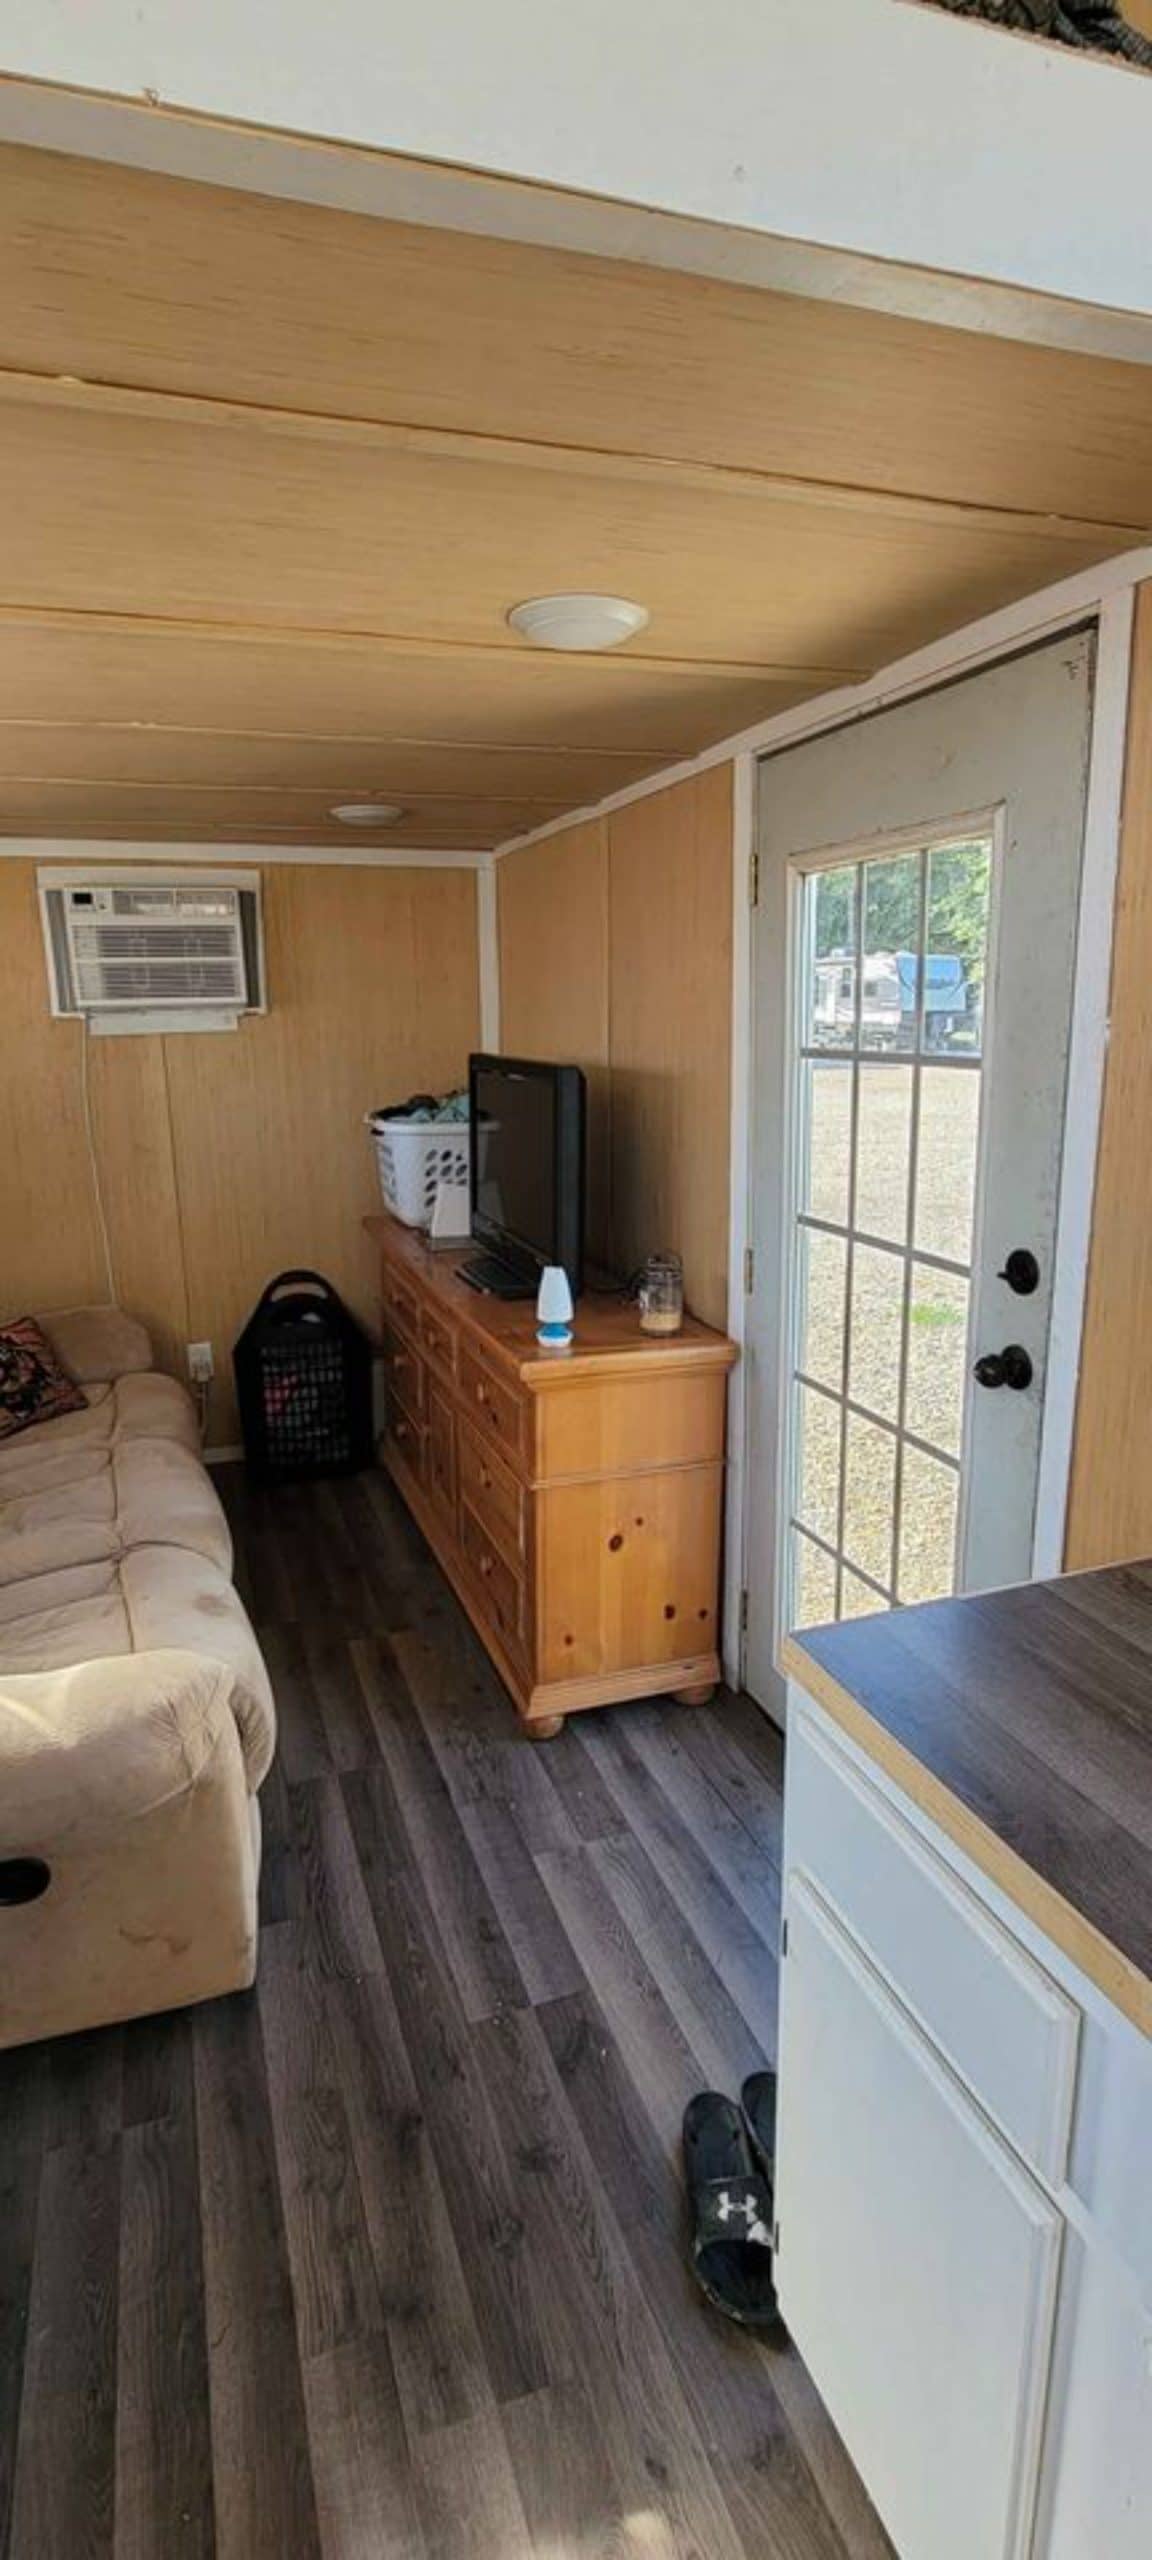 Opposite to couch there is wall unit and television set in the living area of 28' Budget Friendly Tiny House